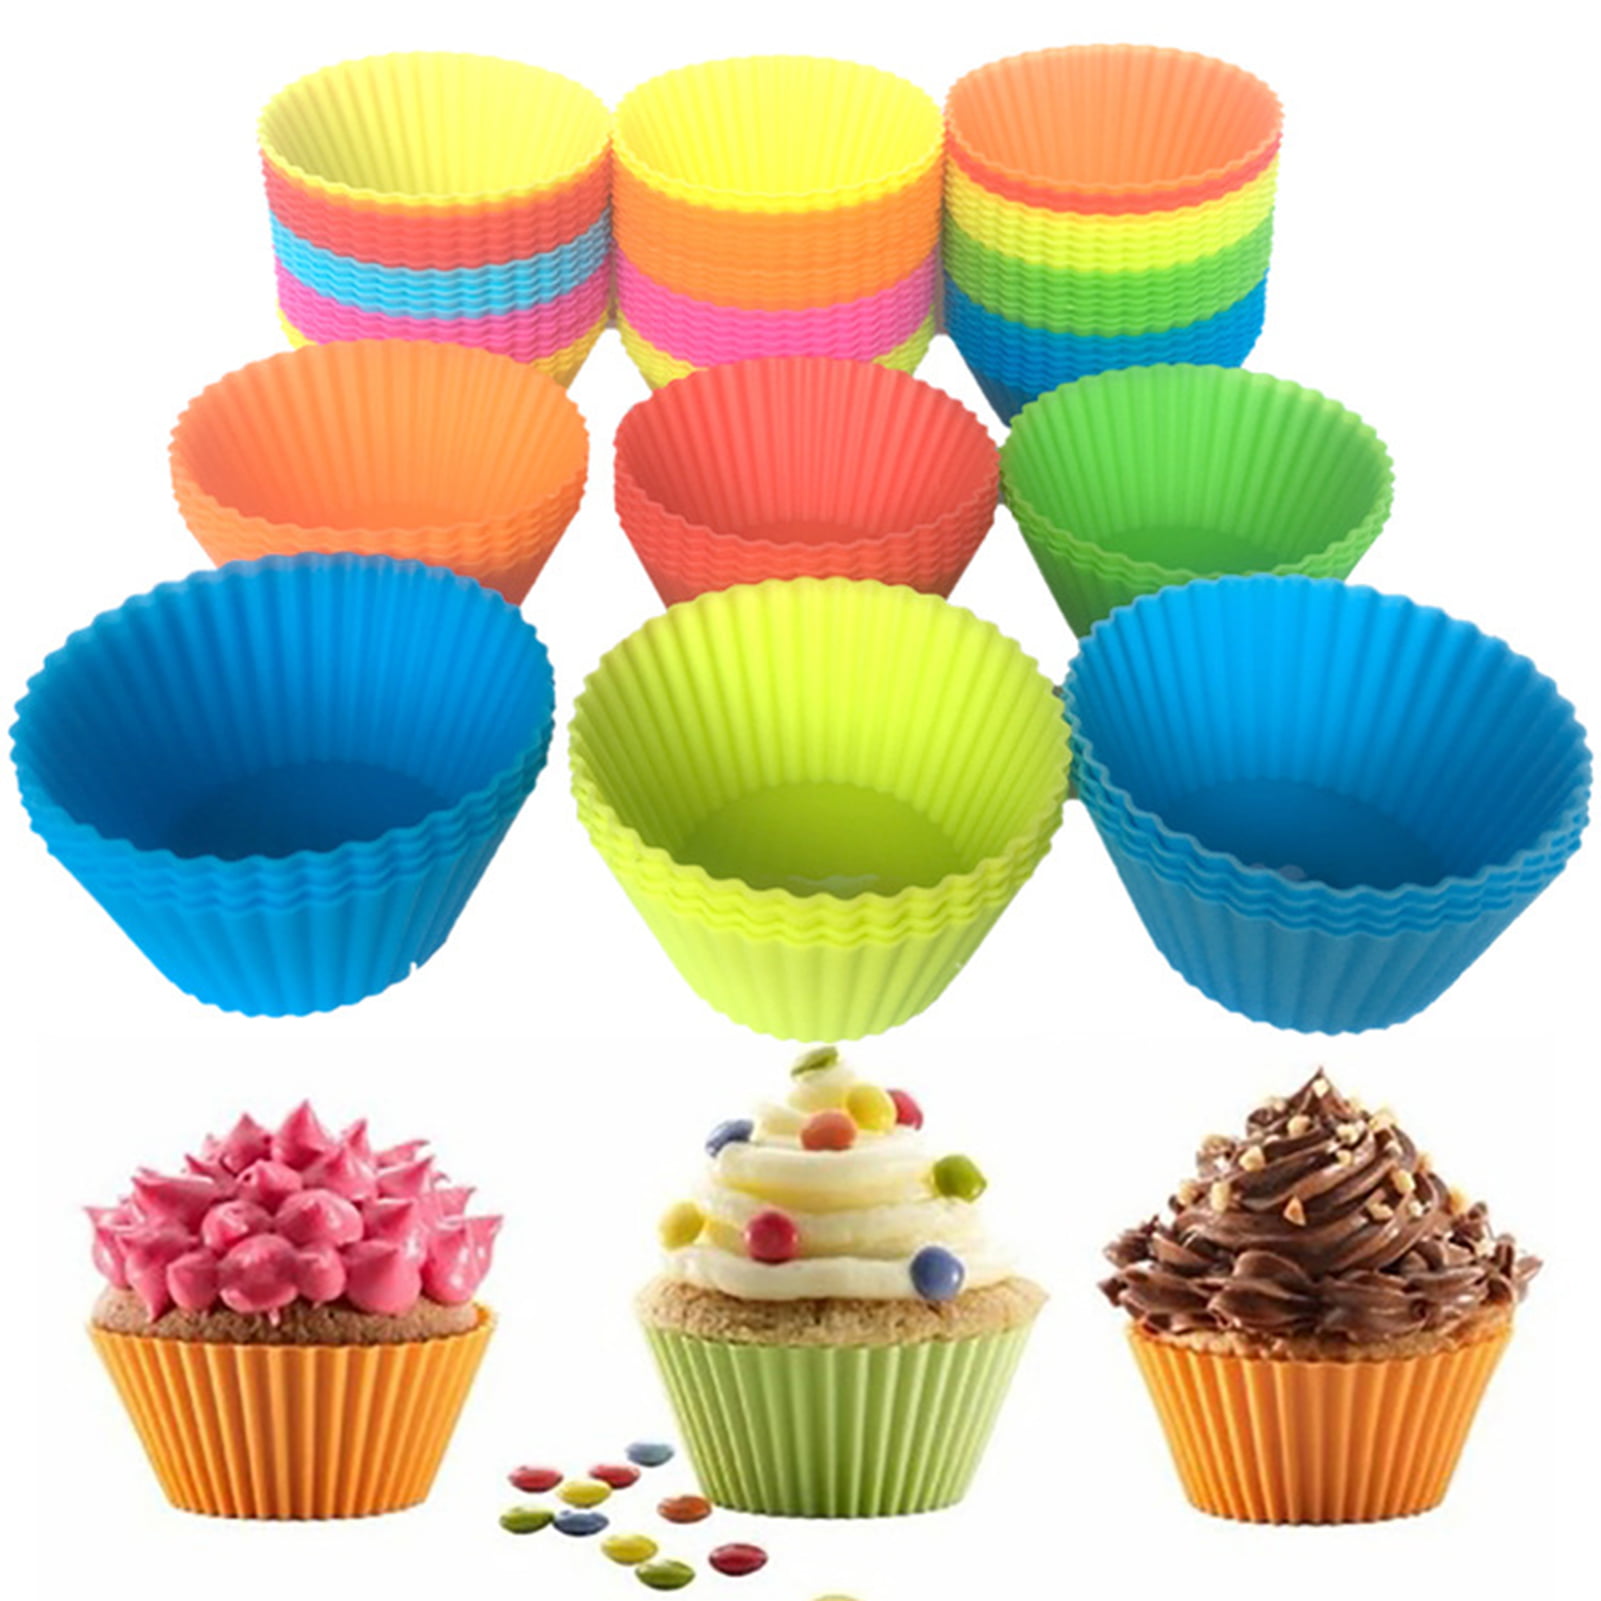 Details about   Mould Muffin Mold Cake Pan Chocolate Cupcake Cookie Silicone 12 Cup Baking 